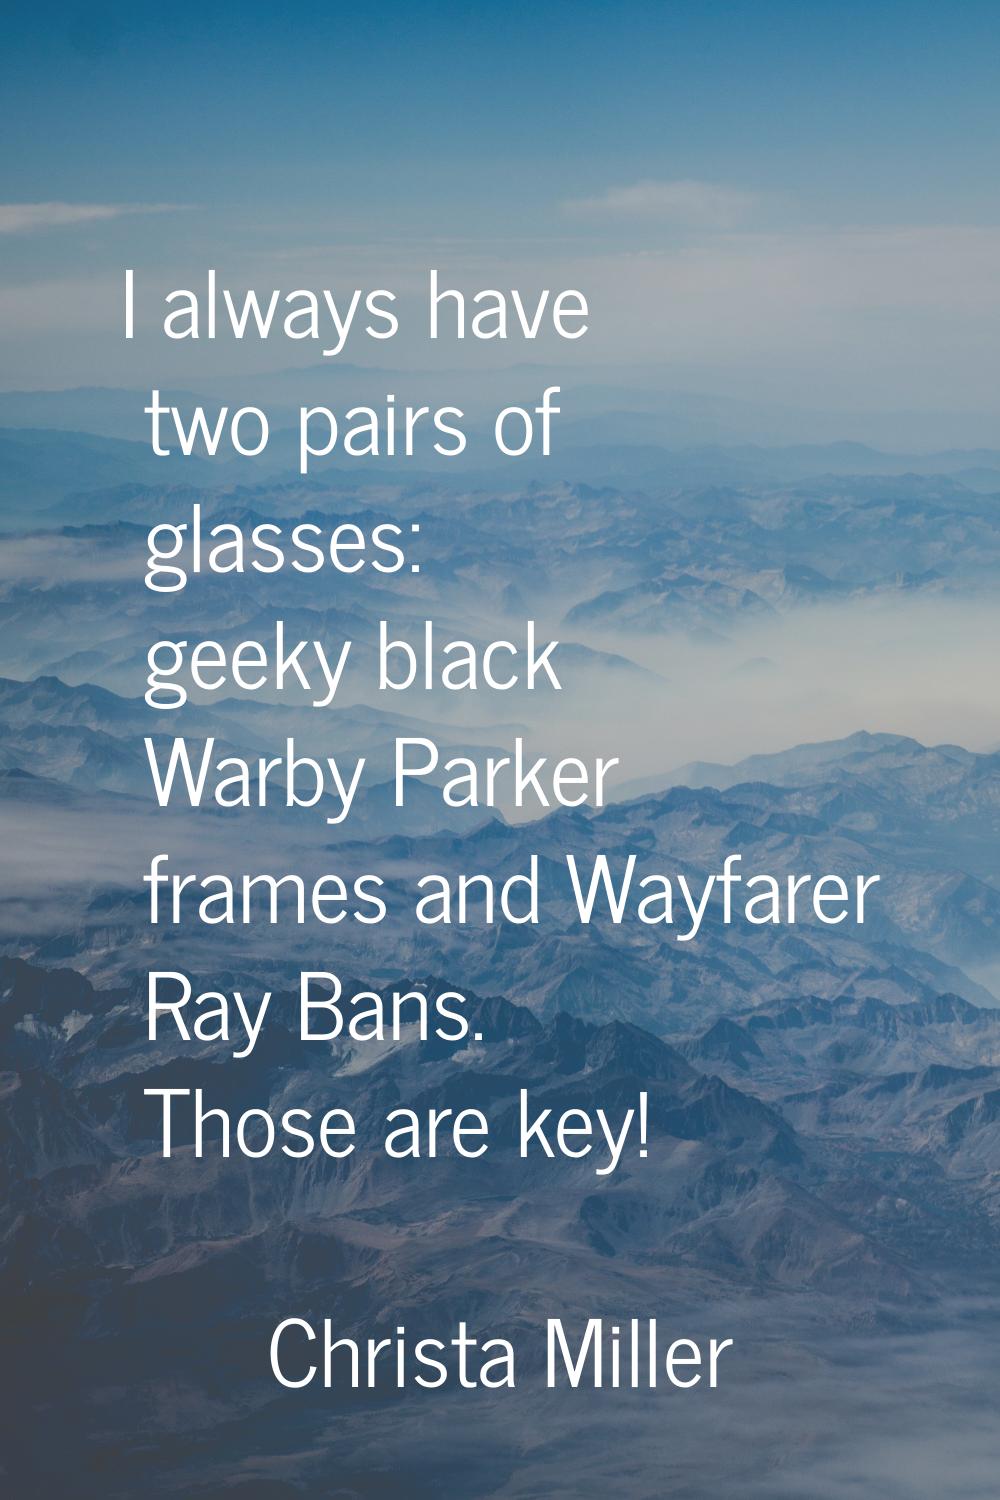 I always have two pairs of glasses: geeky black Warby Parker frames and Wayfarer Ray Bans. Those ar